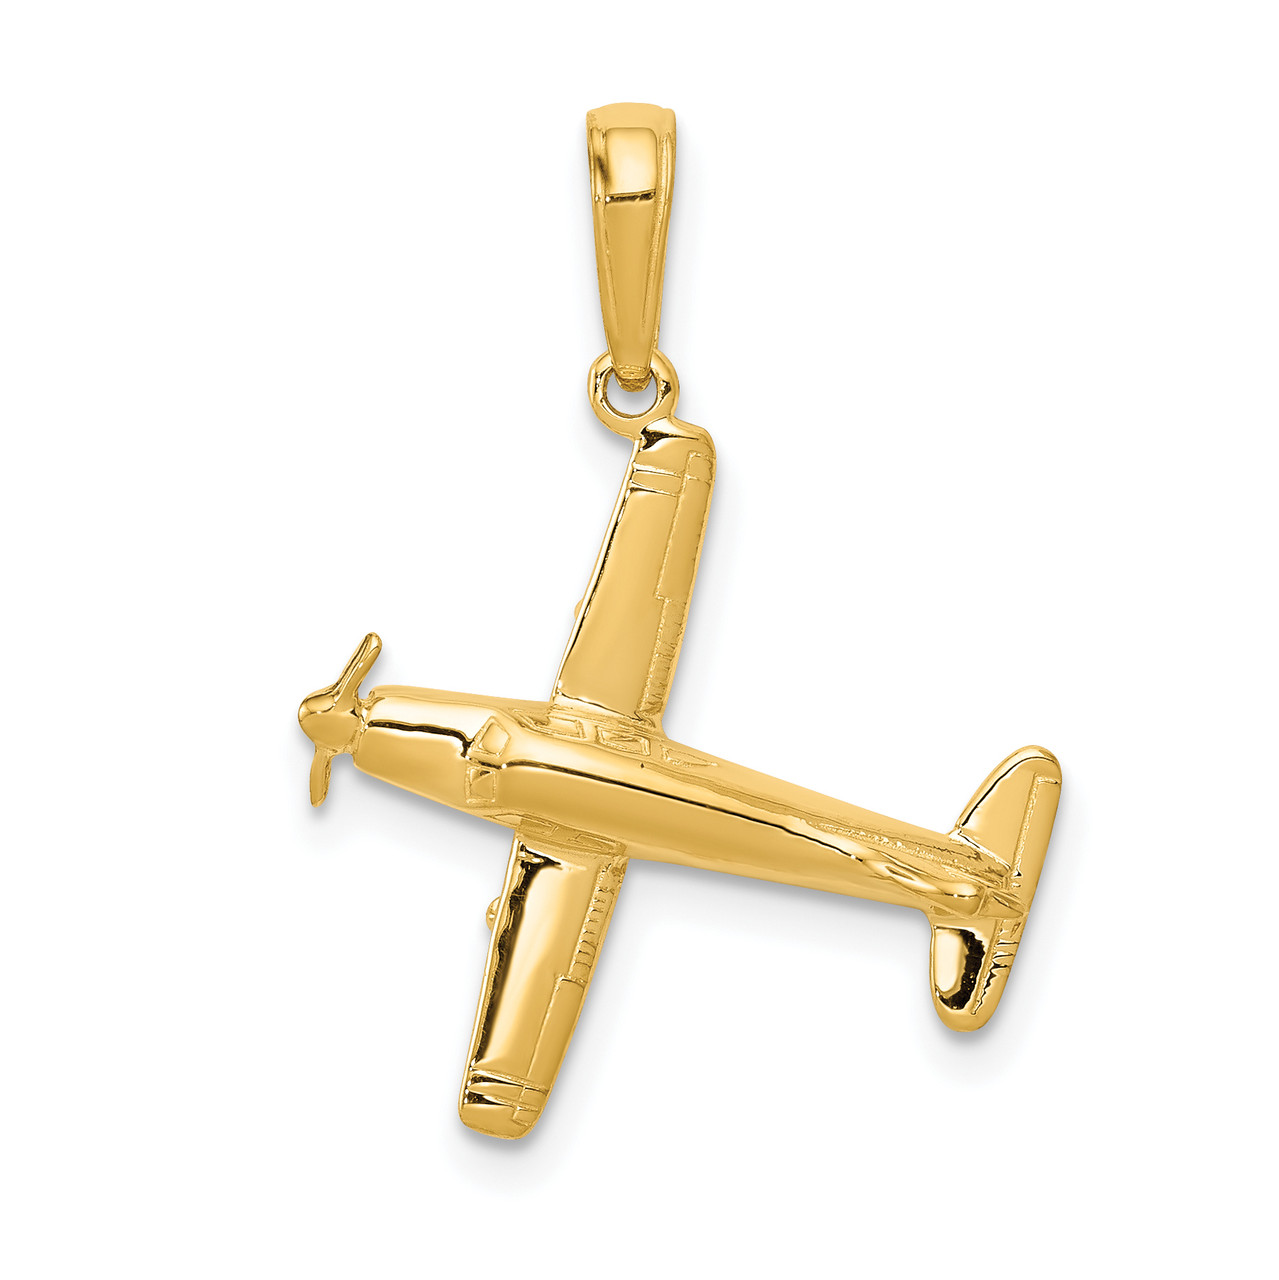 14KT Gold Gold 3-D Low-Wing Airplane Pendant - Reflections Fine